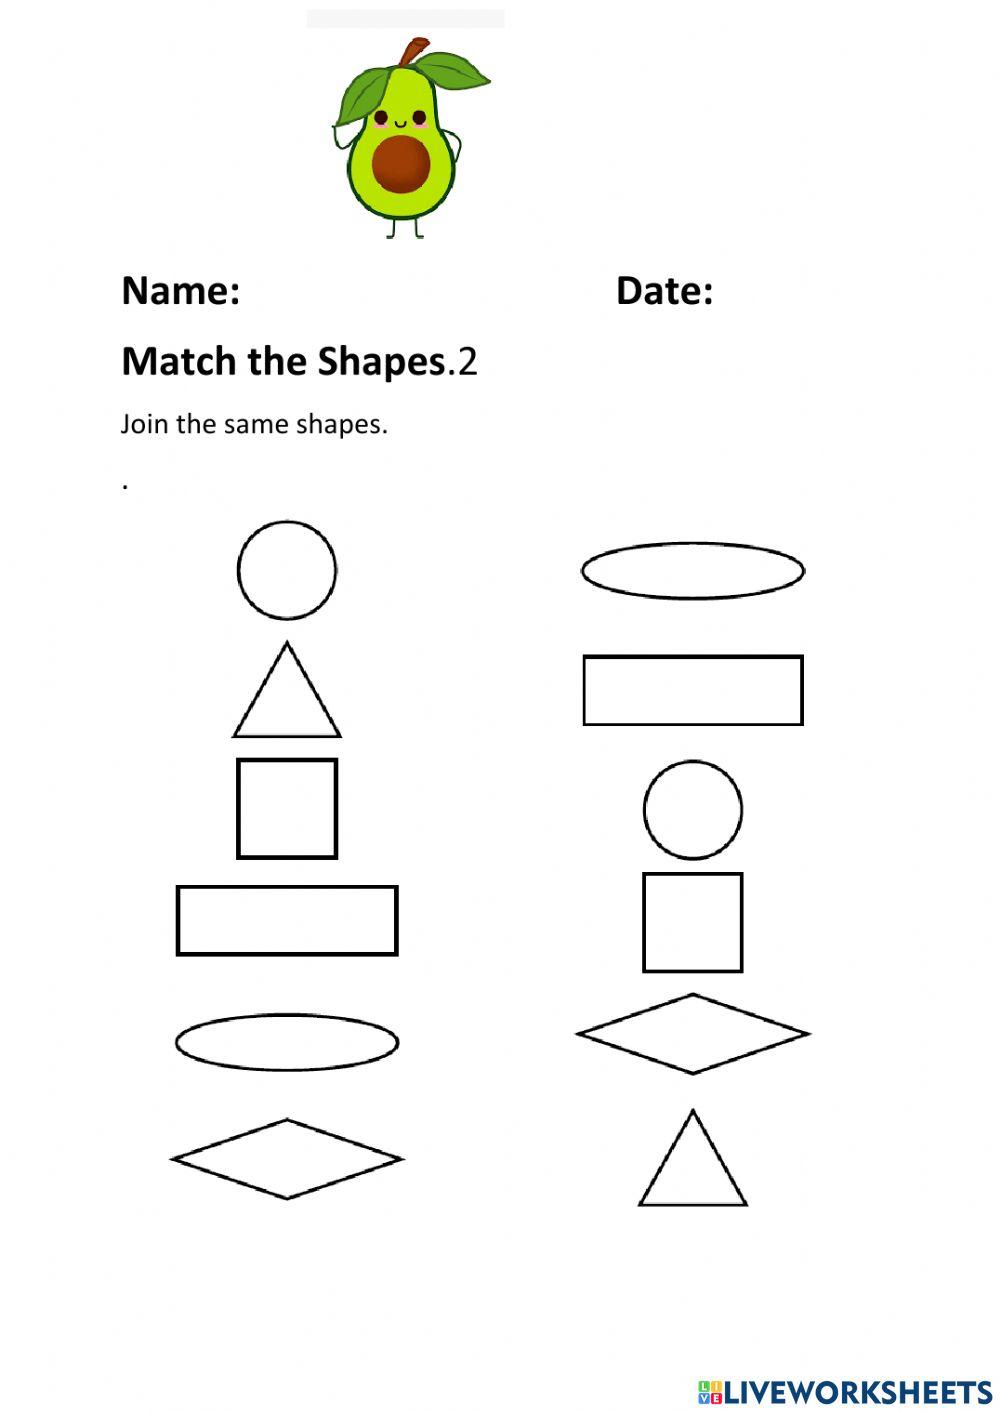 Match the Shapes 2